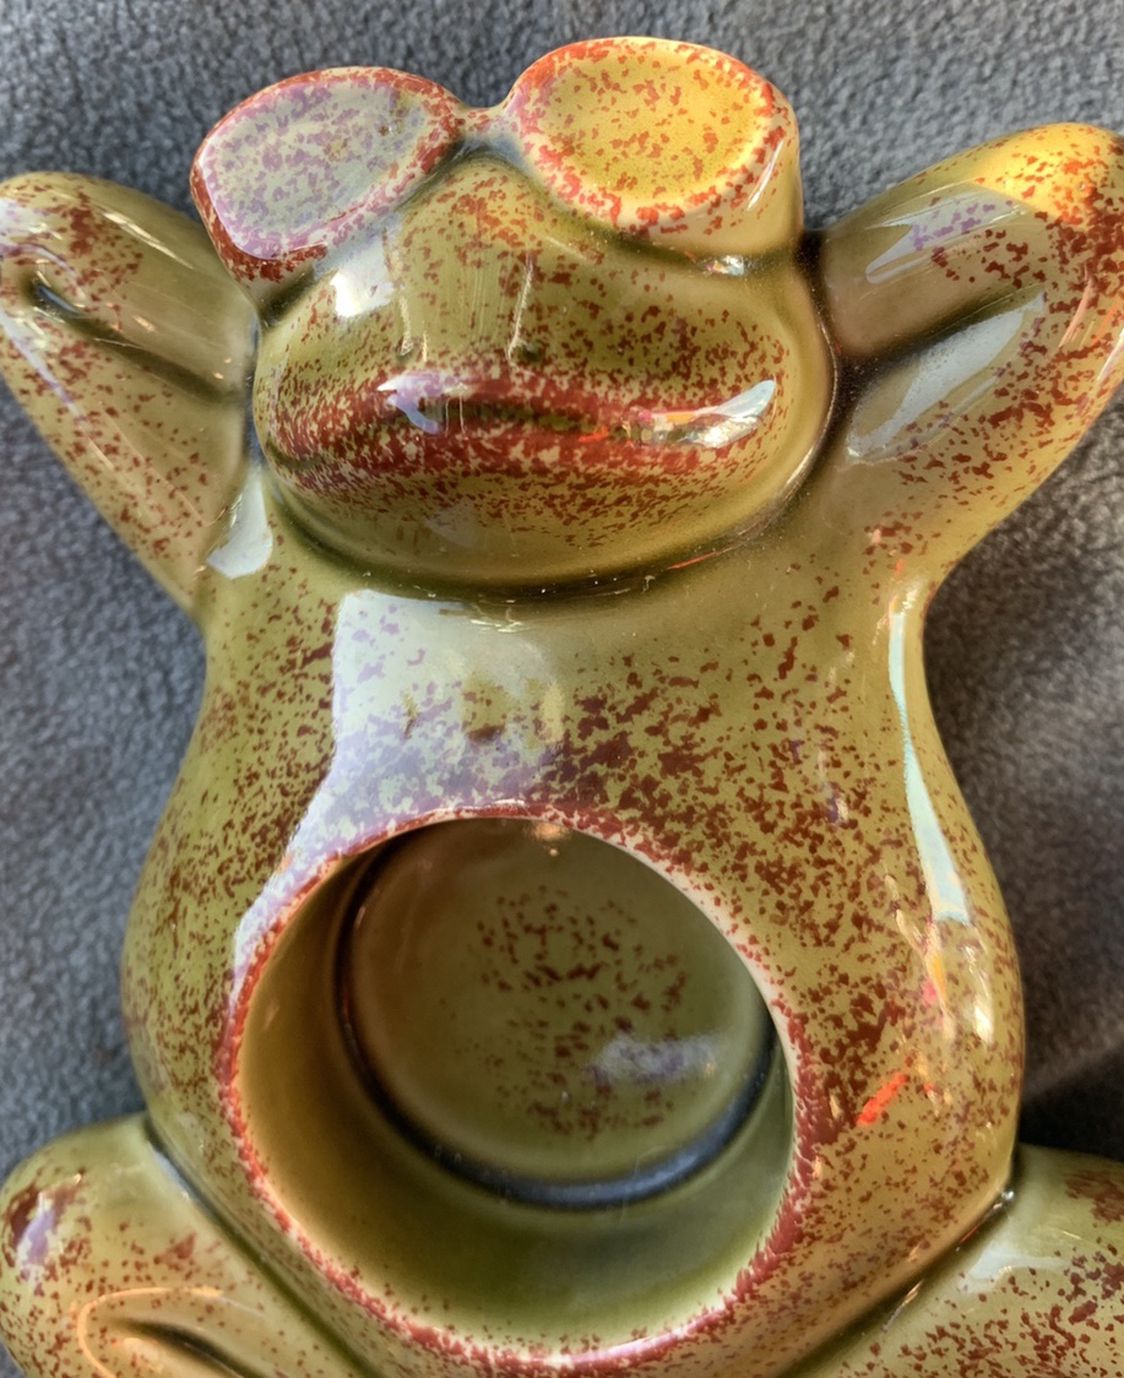 Frog candle holder. New. Comes with a new package of tea light candles of 12